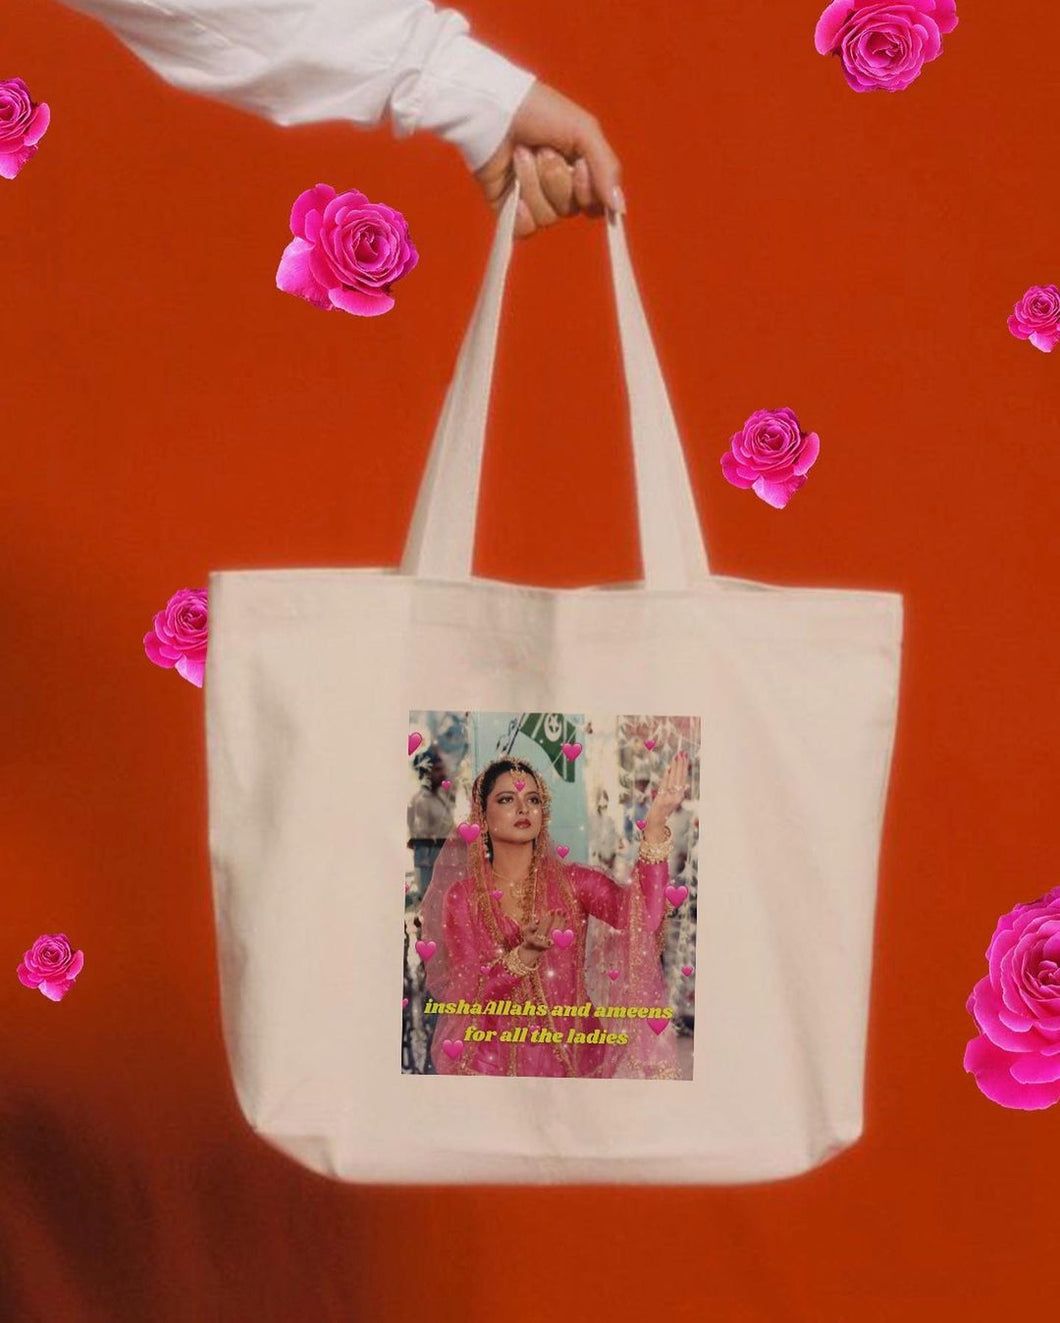 InshaAllahs & Ameens - Dilchasp Meme Totes | Canvas Tote Bags